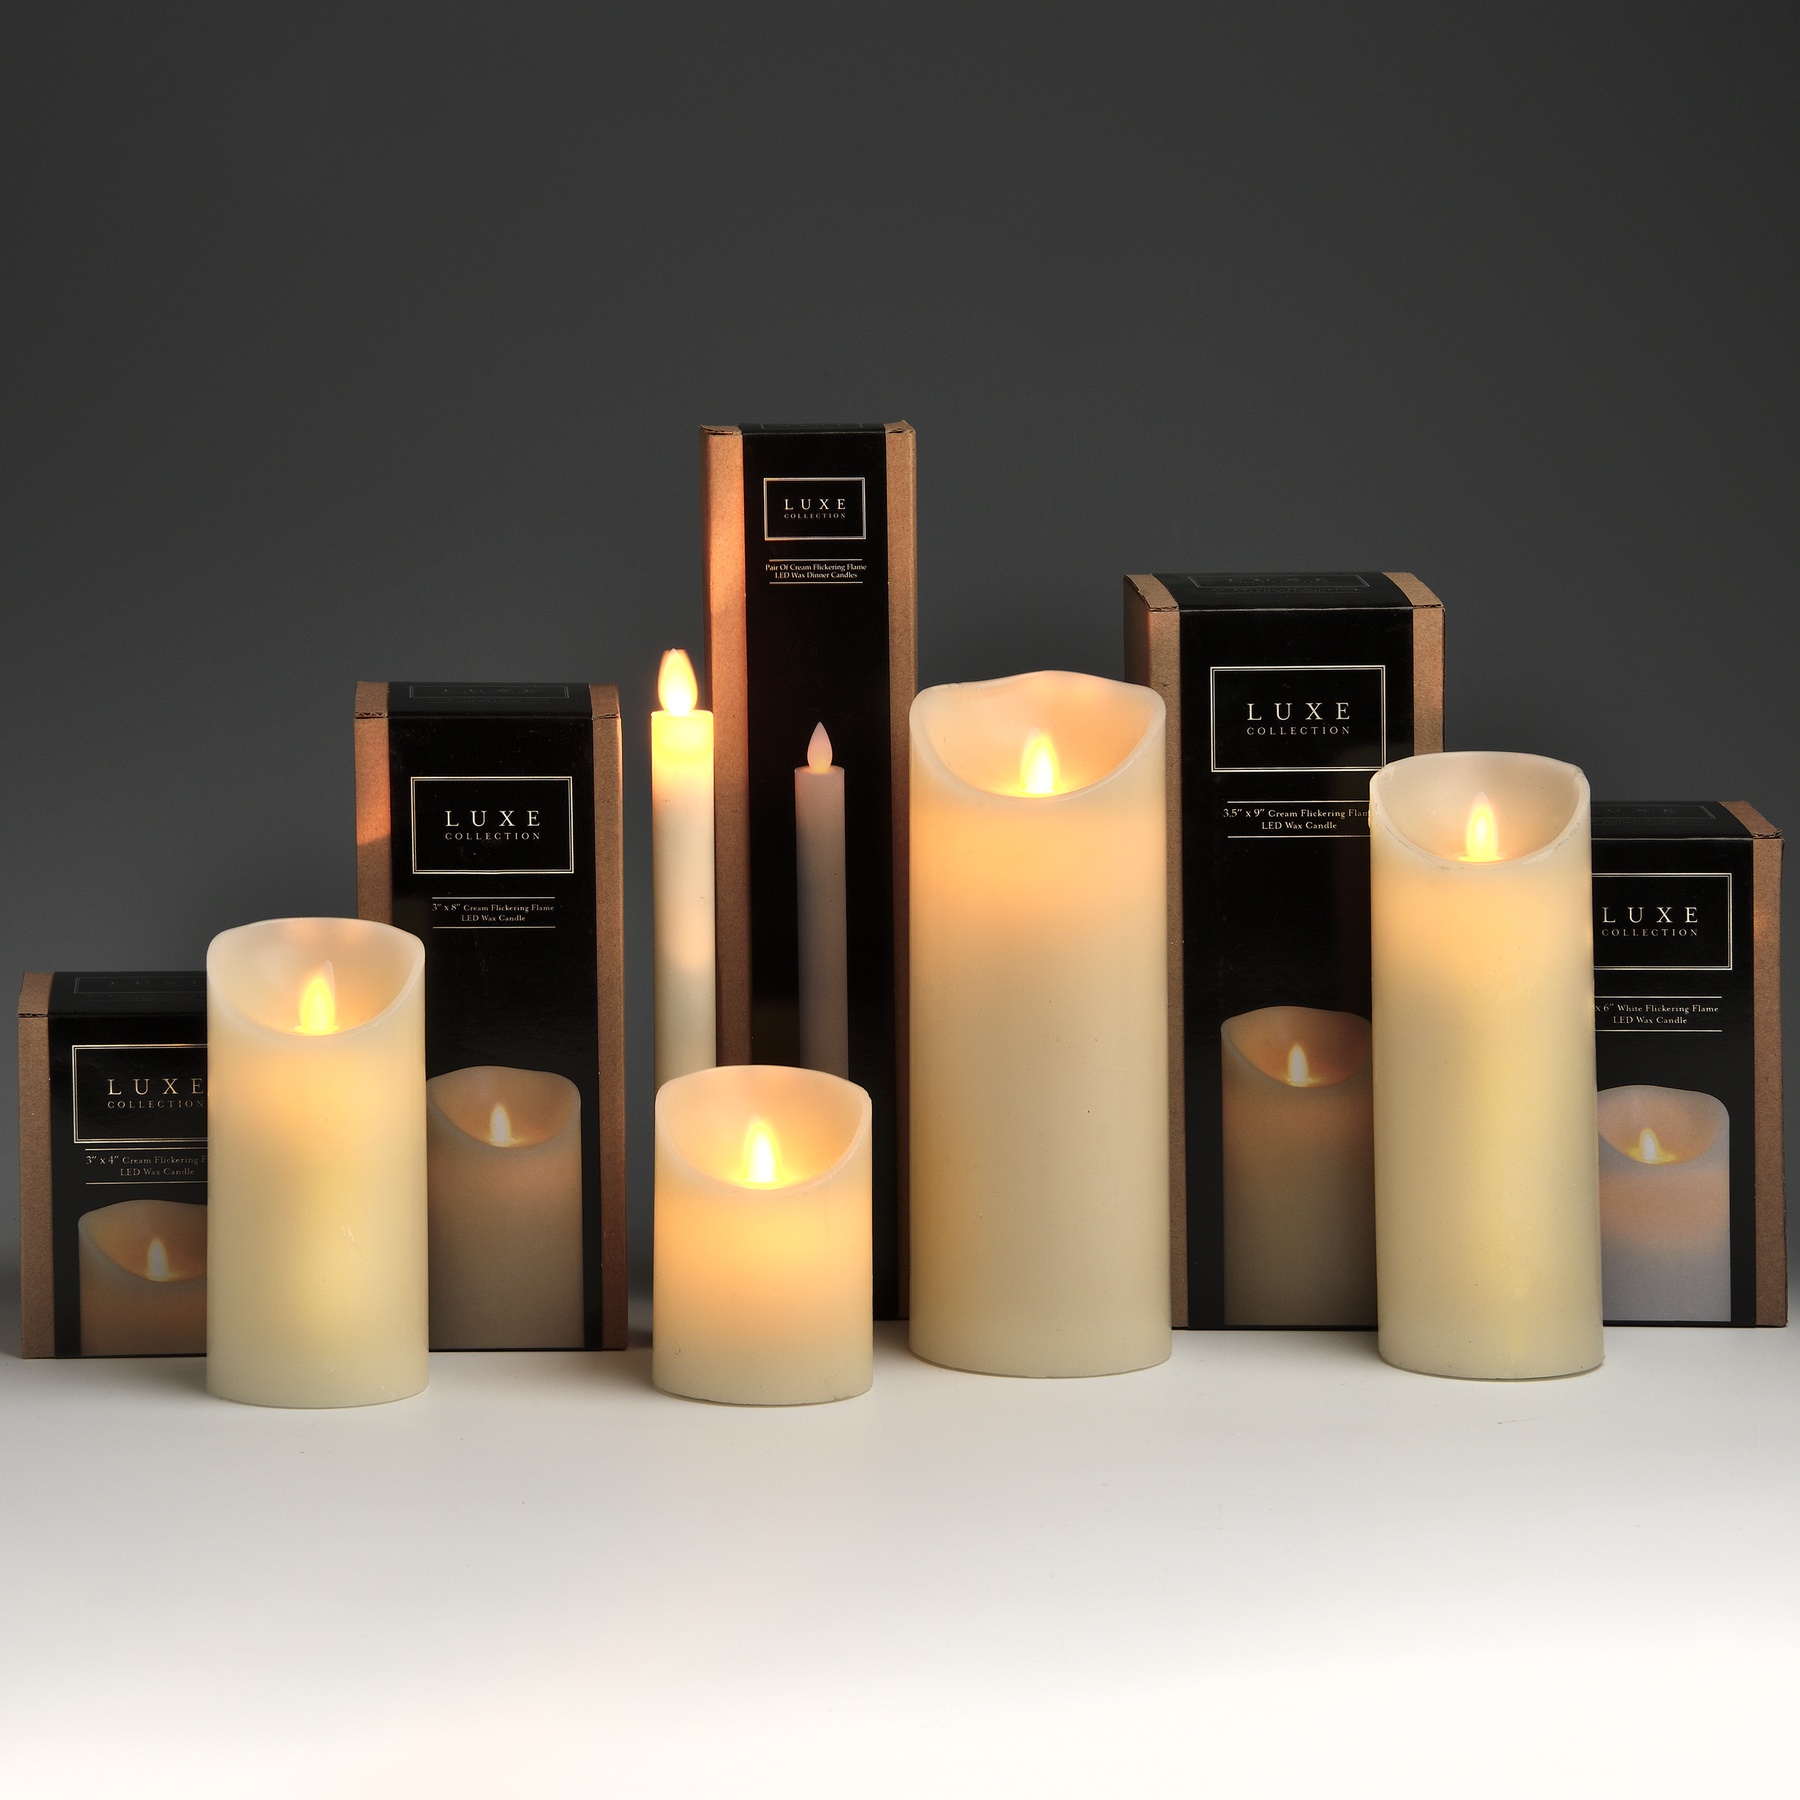 Luxe Collection 3 x 8 Cream Flickering Flame LED Wax Candle - Image 4